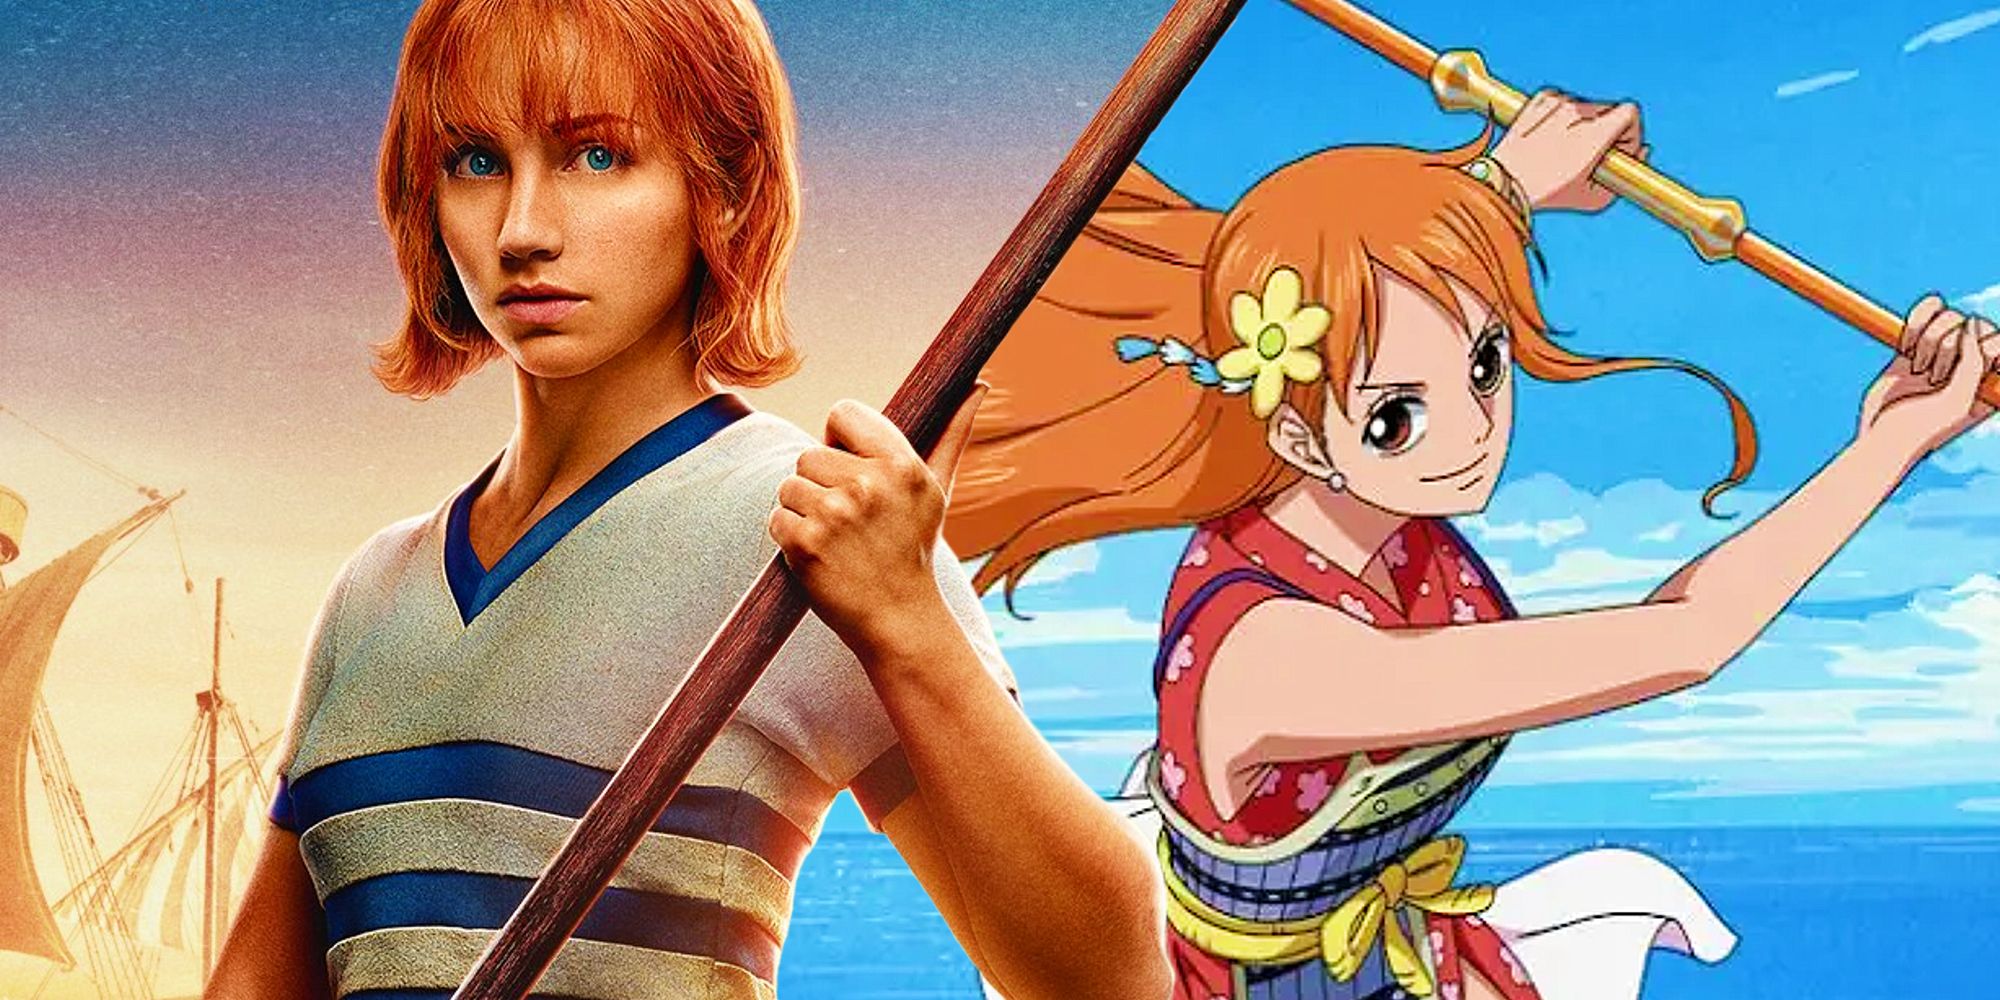 Nami's Look In Netflix's 'One Piece' Seems To Be a Deep Cut From